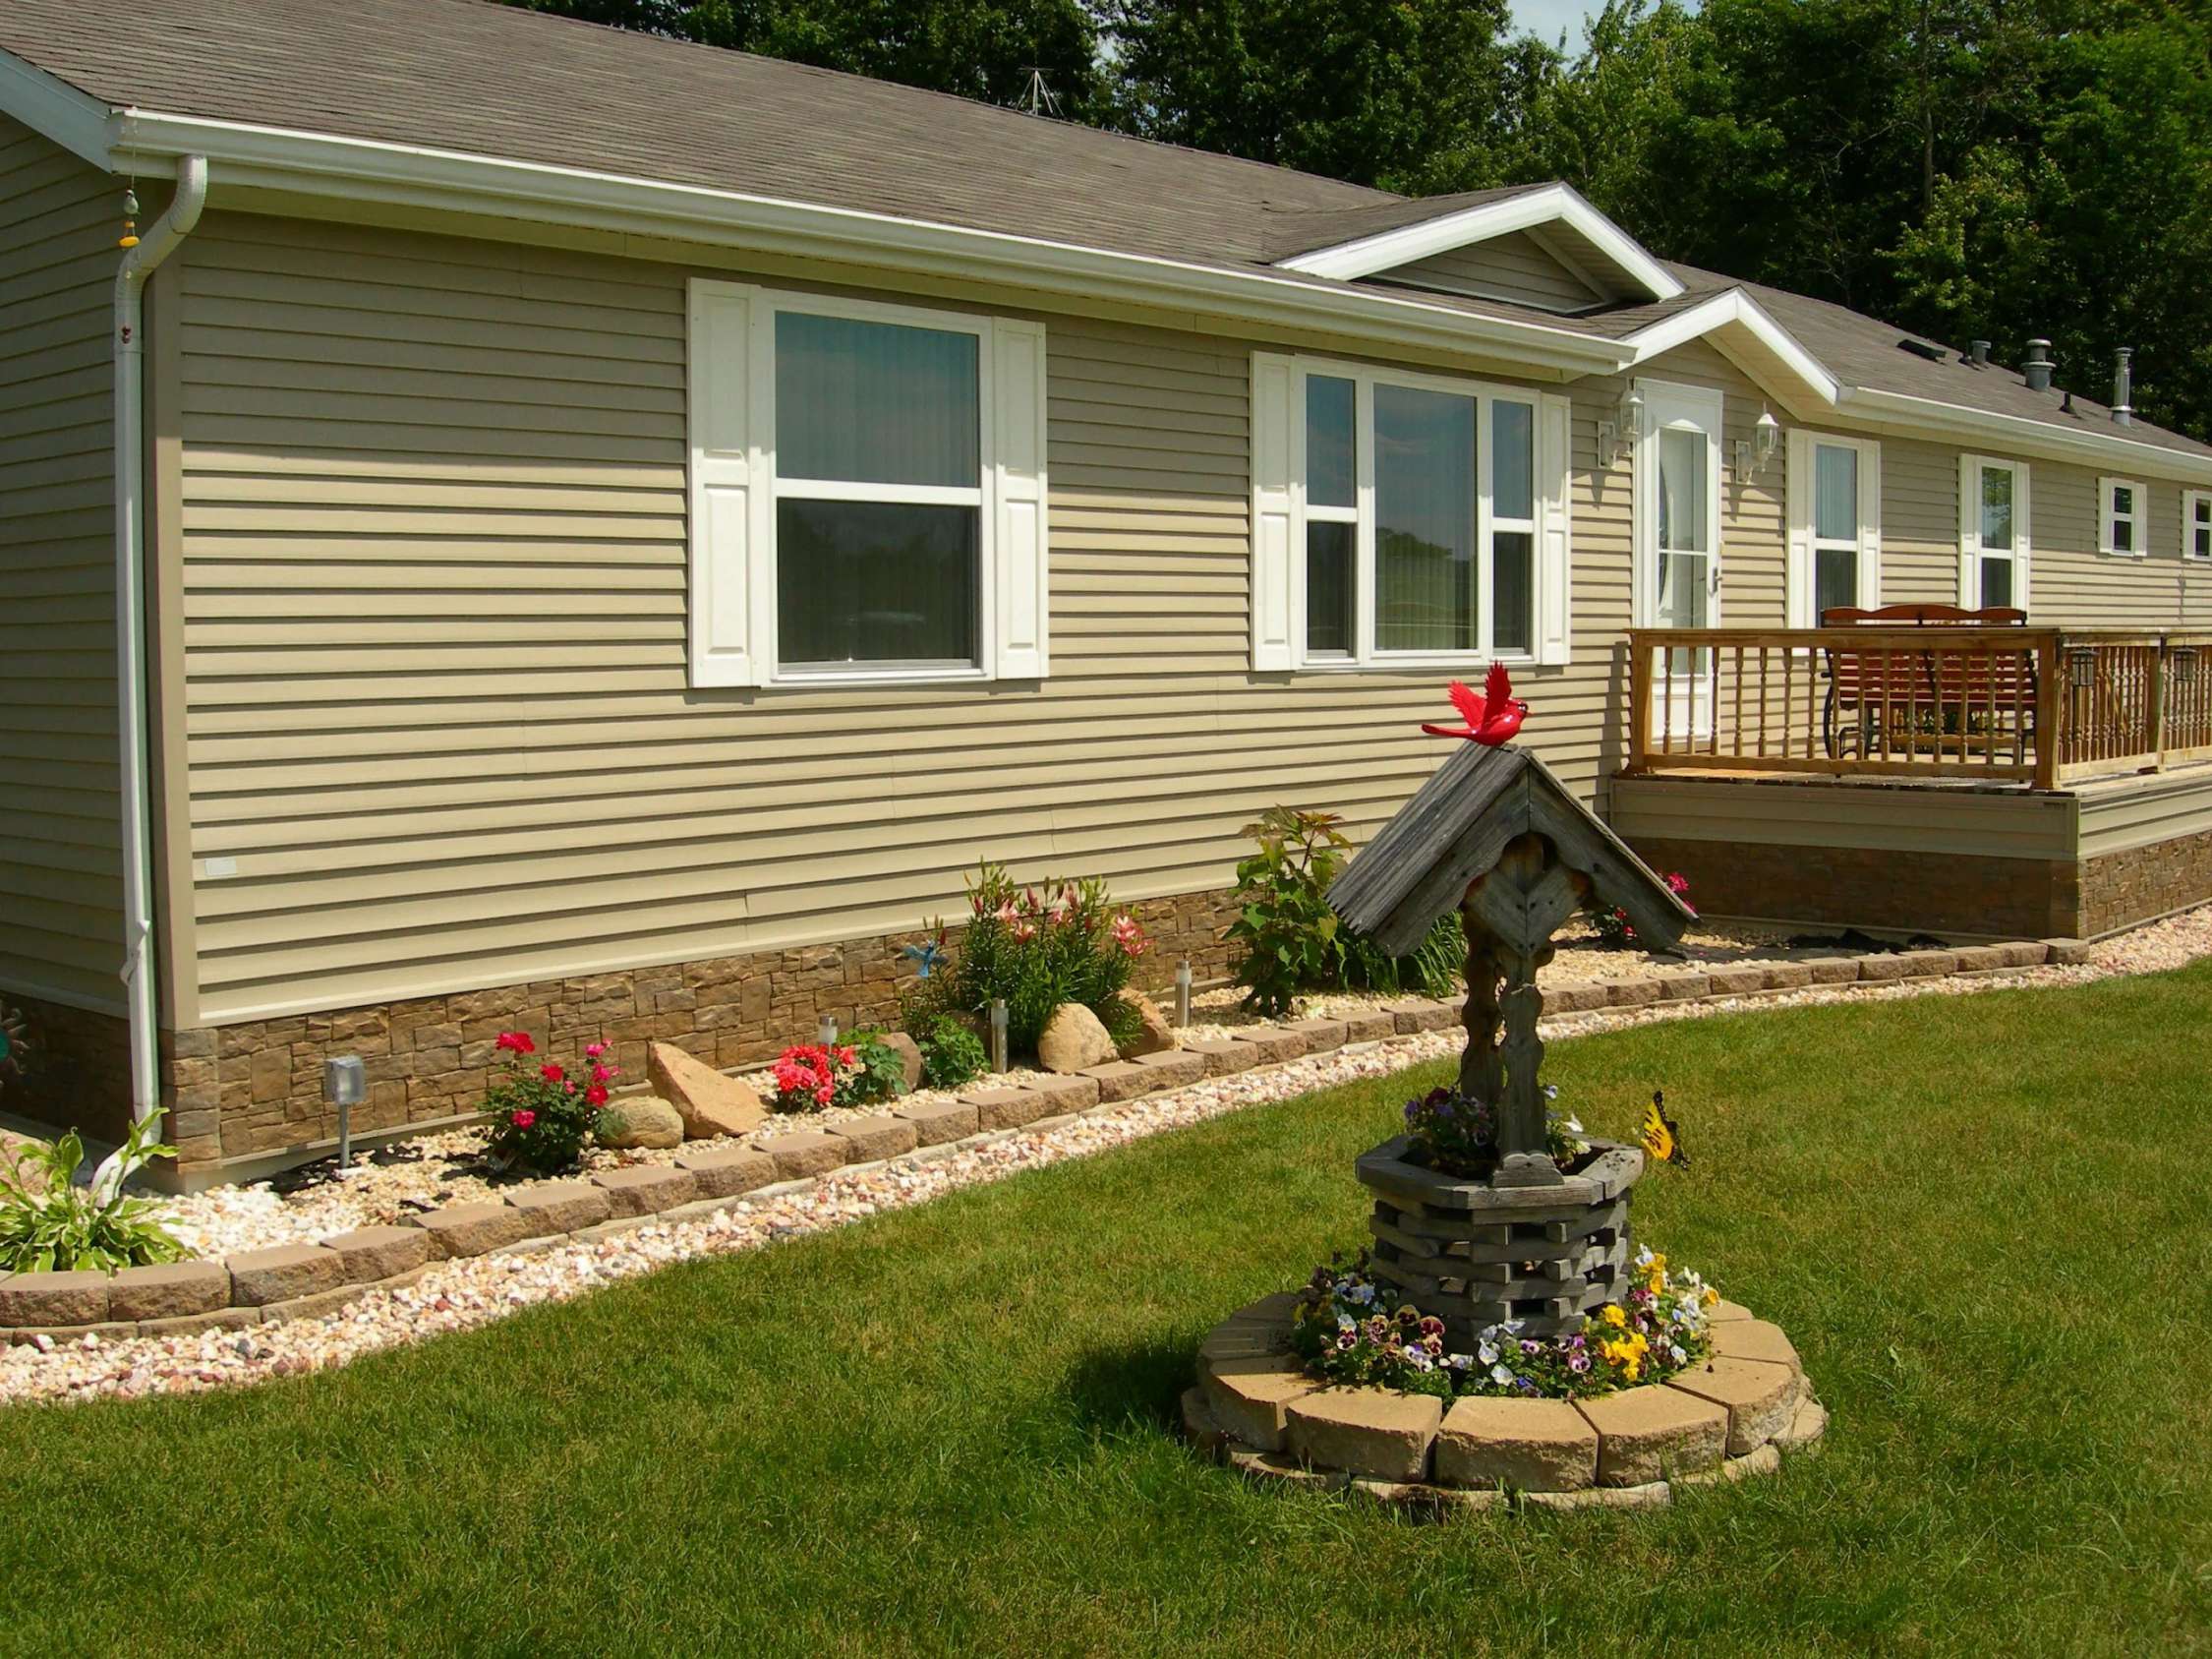 Low-Maintenance Landscaping Tips for Mobile Homes - Four Star Homes